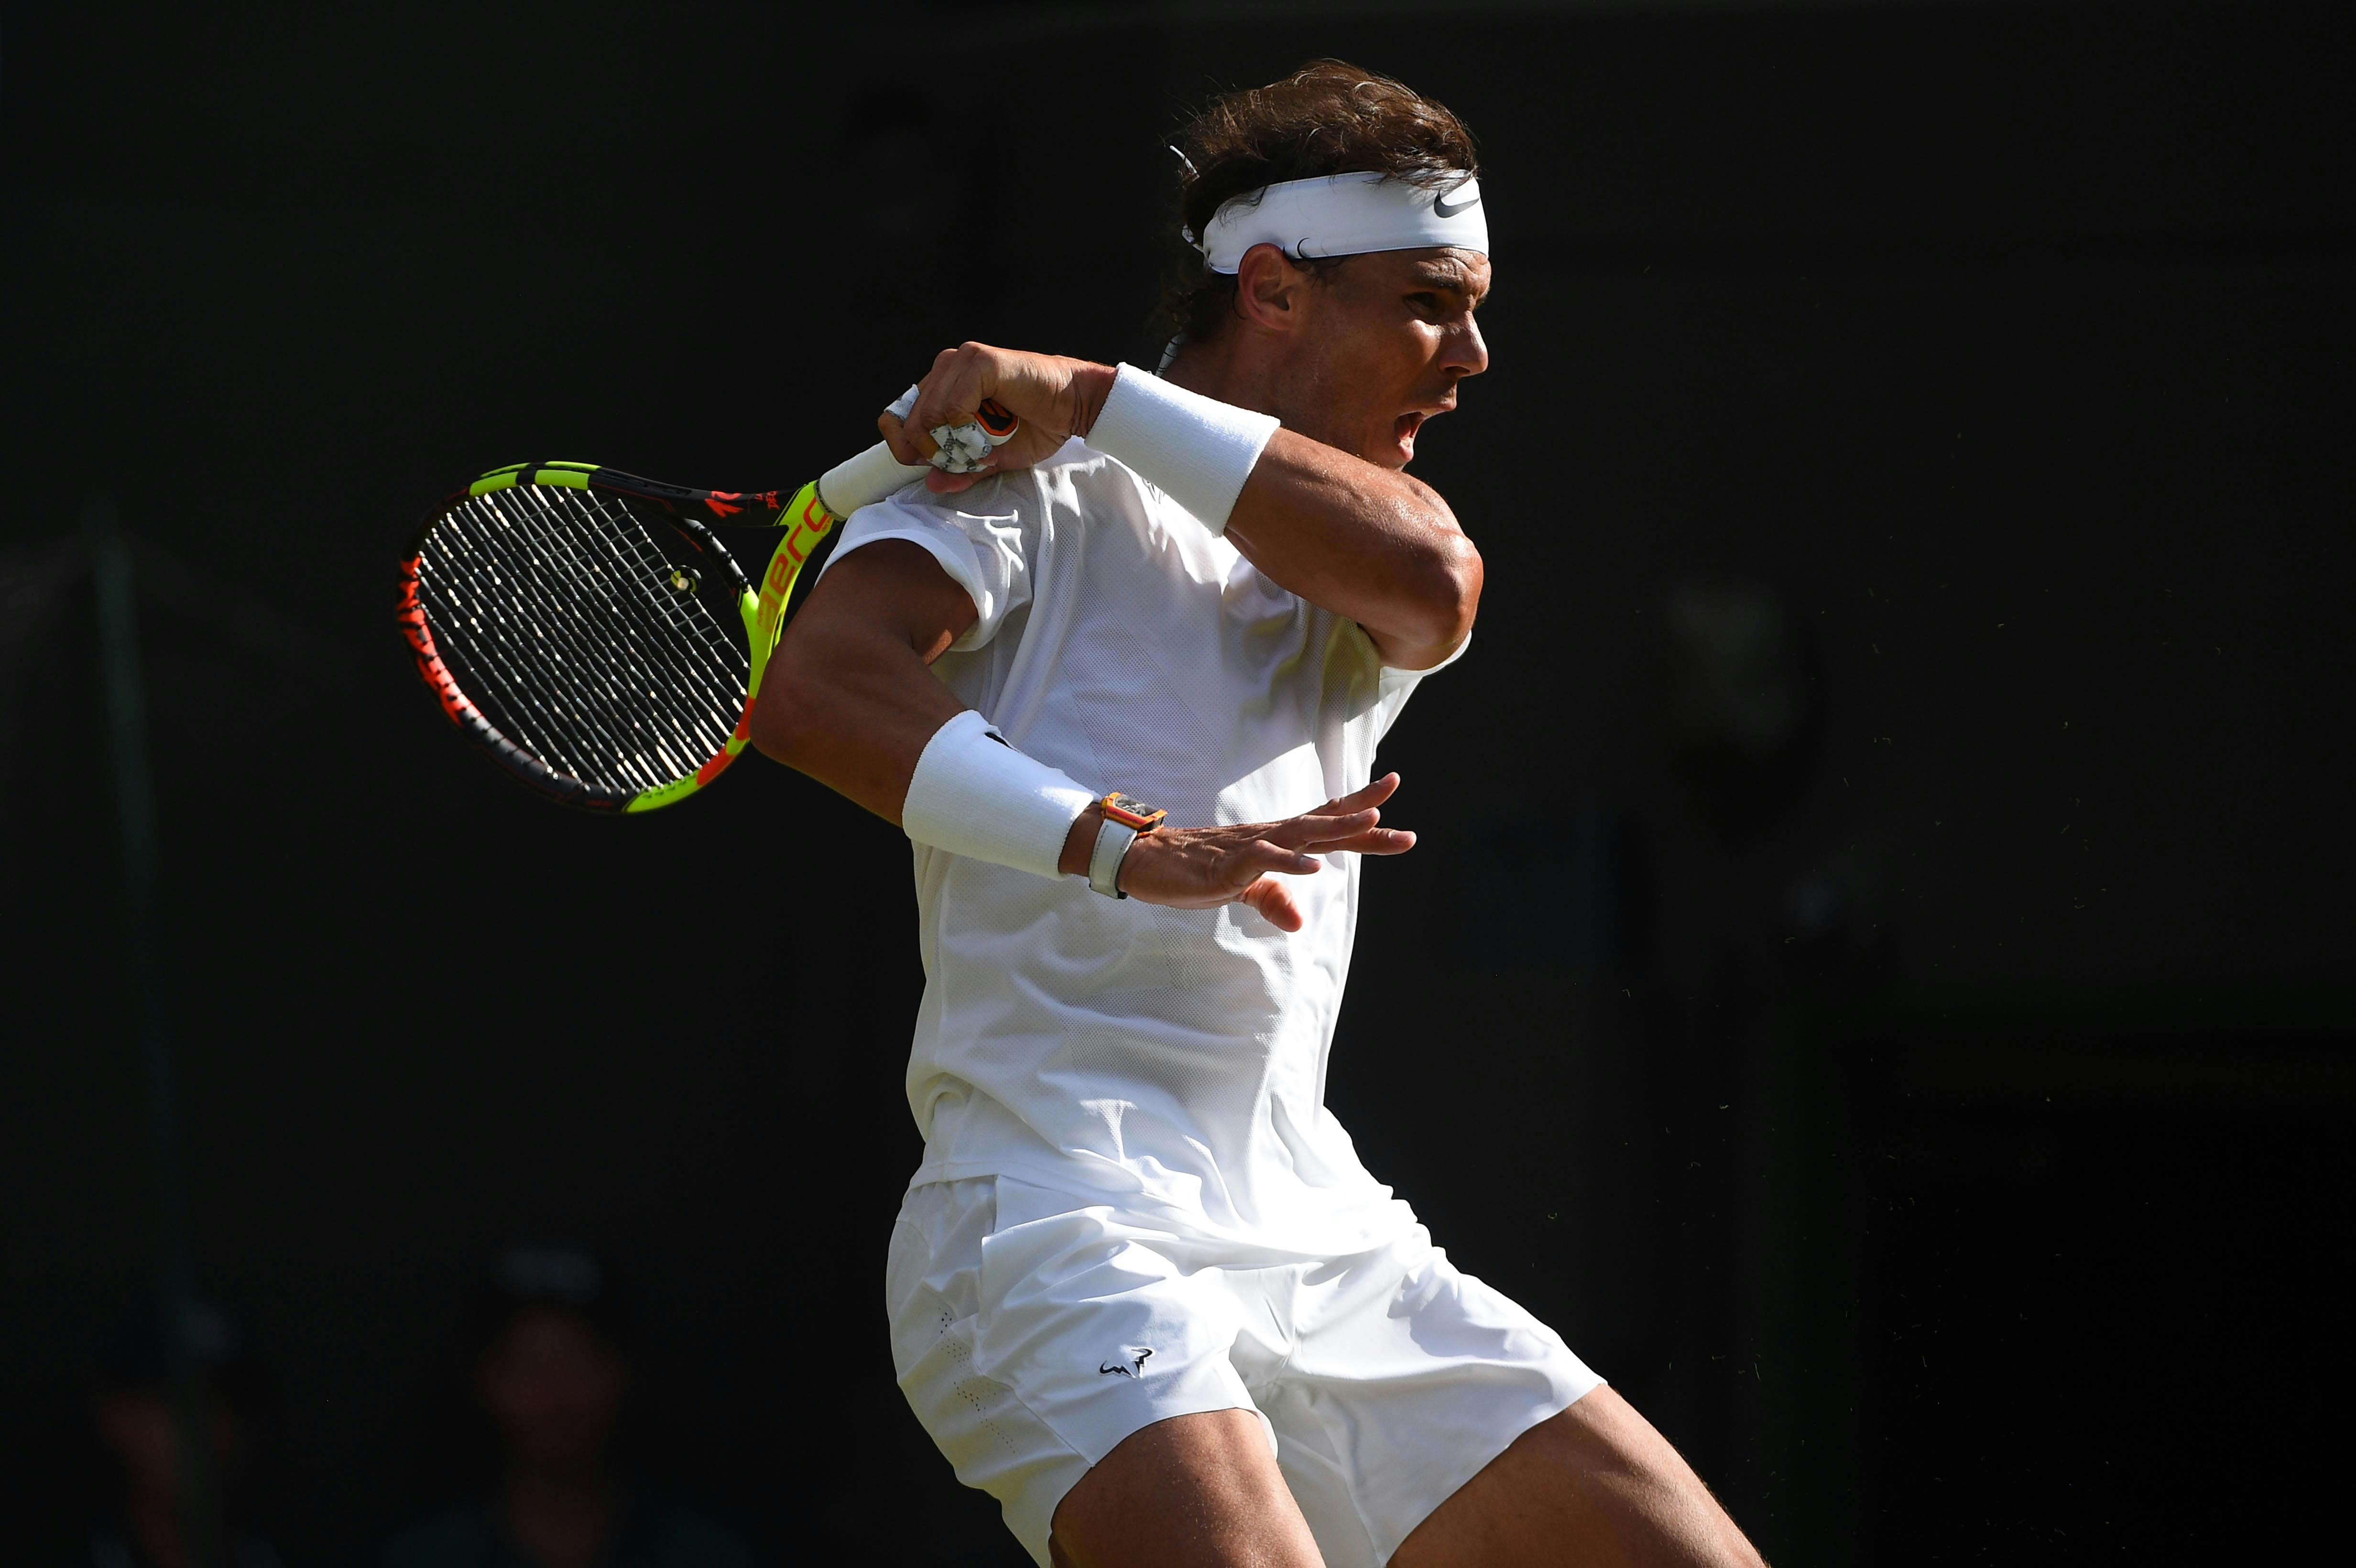 Rafael Nadal hitting a forehand in the light and shadow Wimbledon 2019